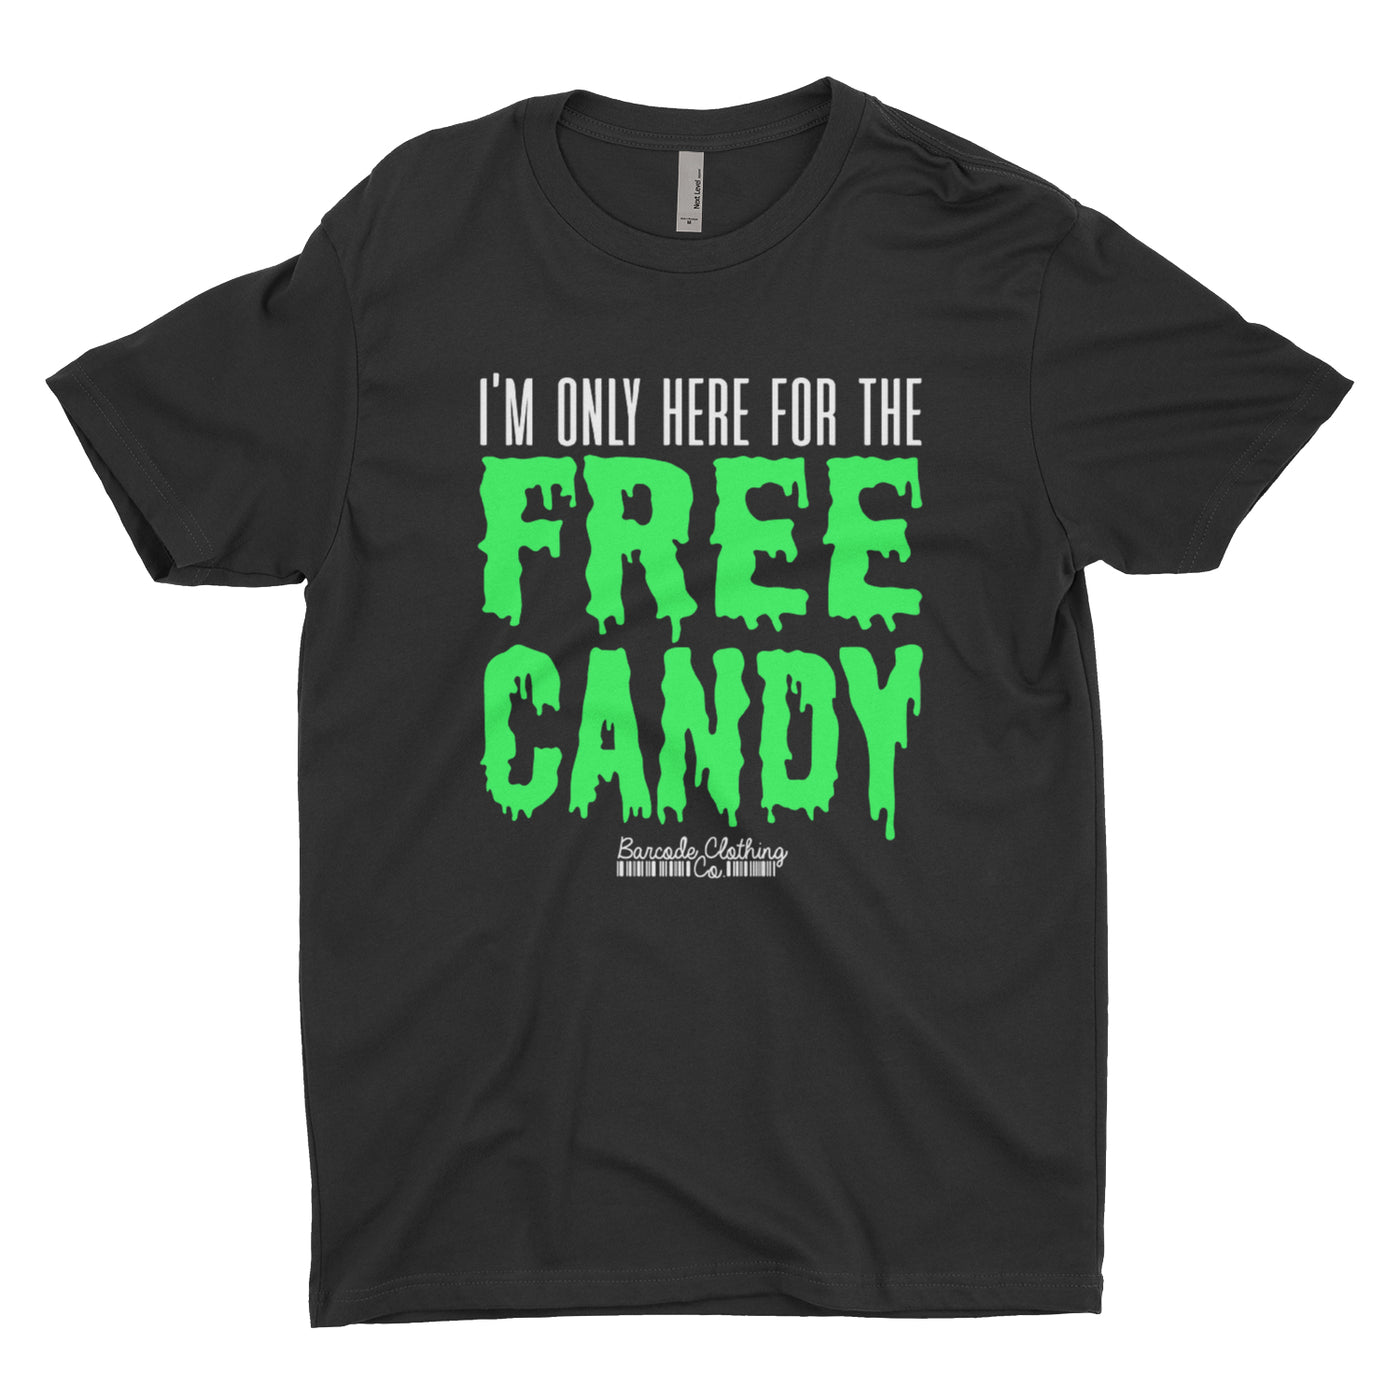 I'm Only Here For The Free Candy